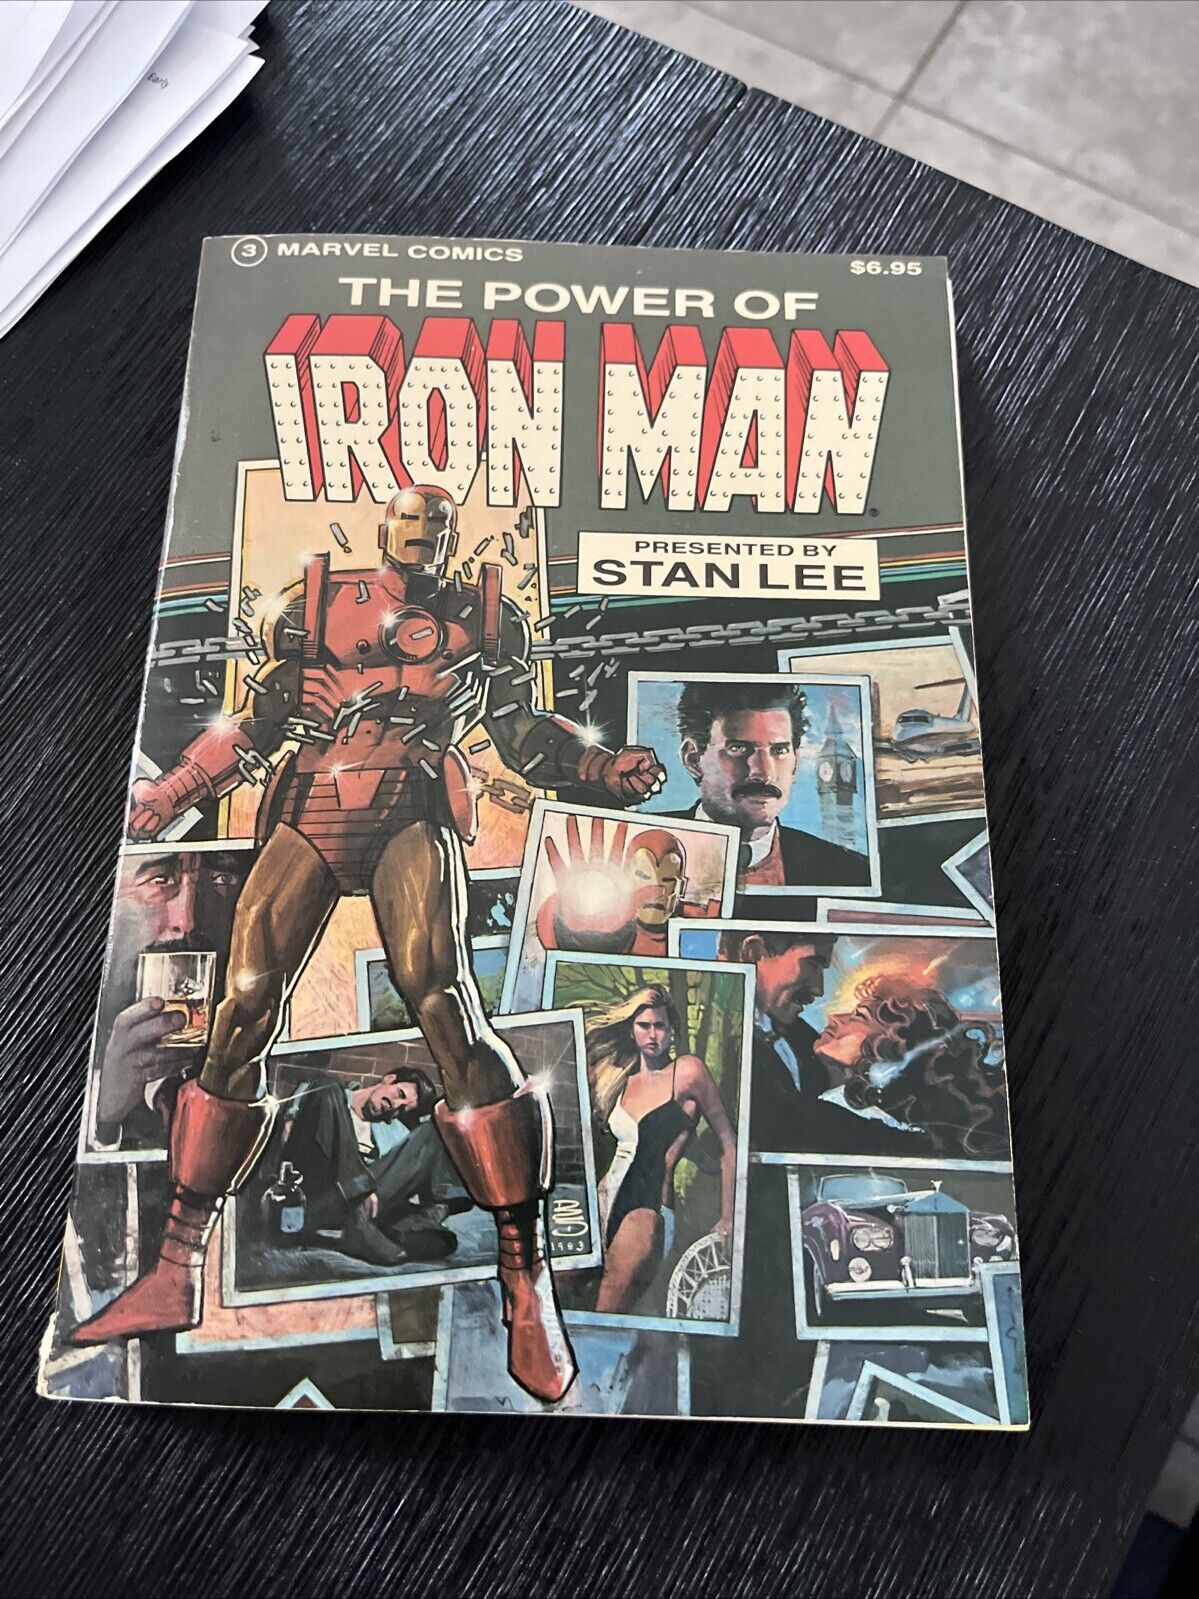 Power of Iron Man ~ Softcover ~ Presented by Stan Lee ~ Marvel Comics ~ 1984